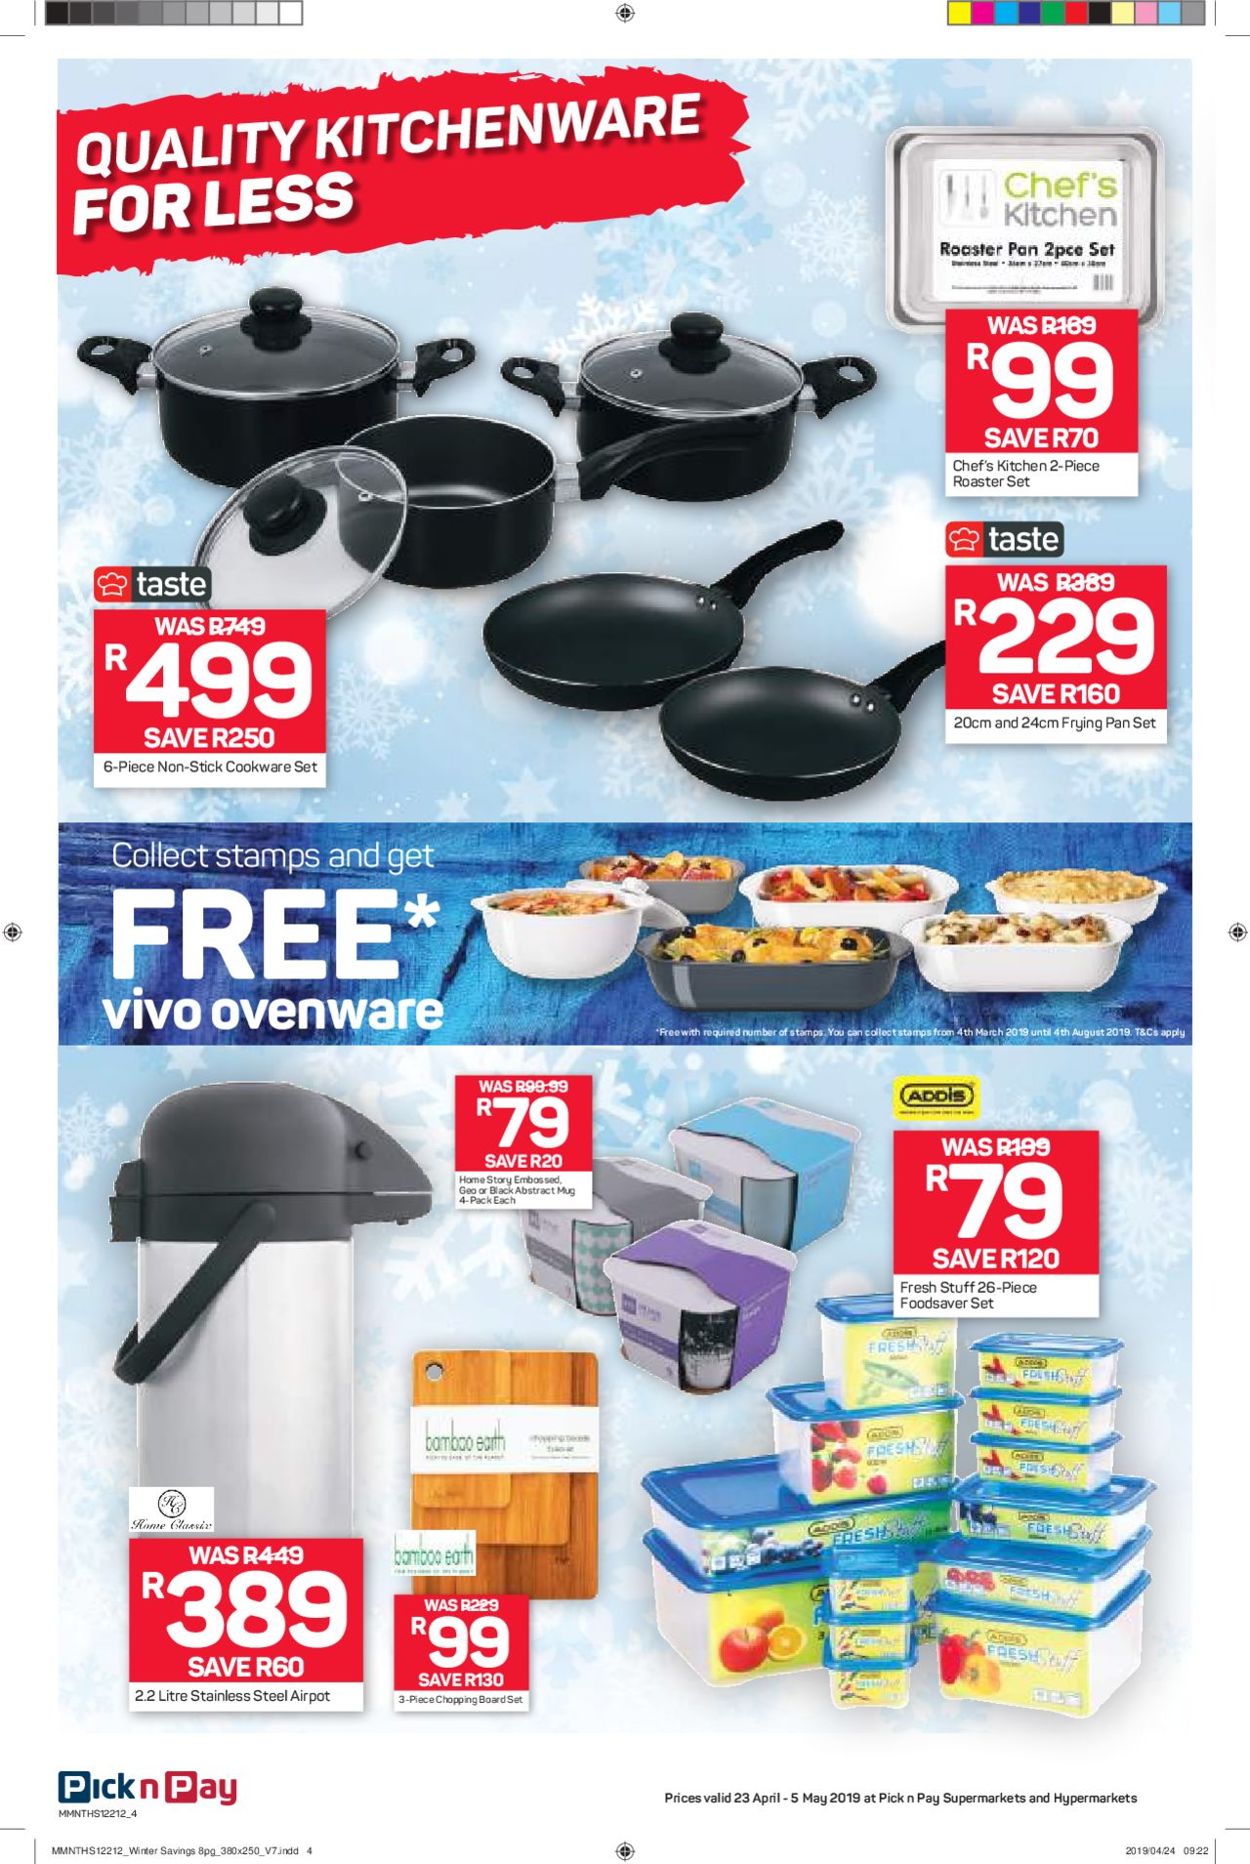 Pick n Pay Catalogue - 2019/04/22-2019/05/05 (Page 4)